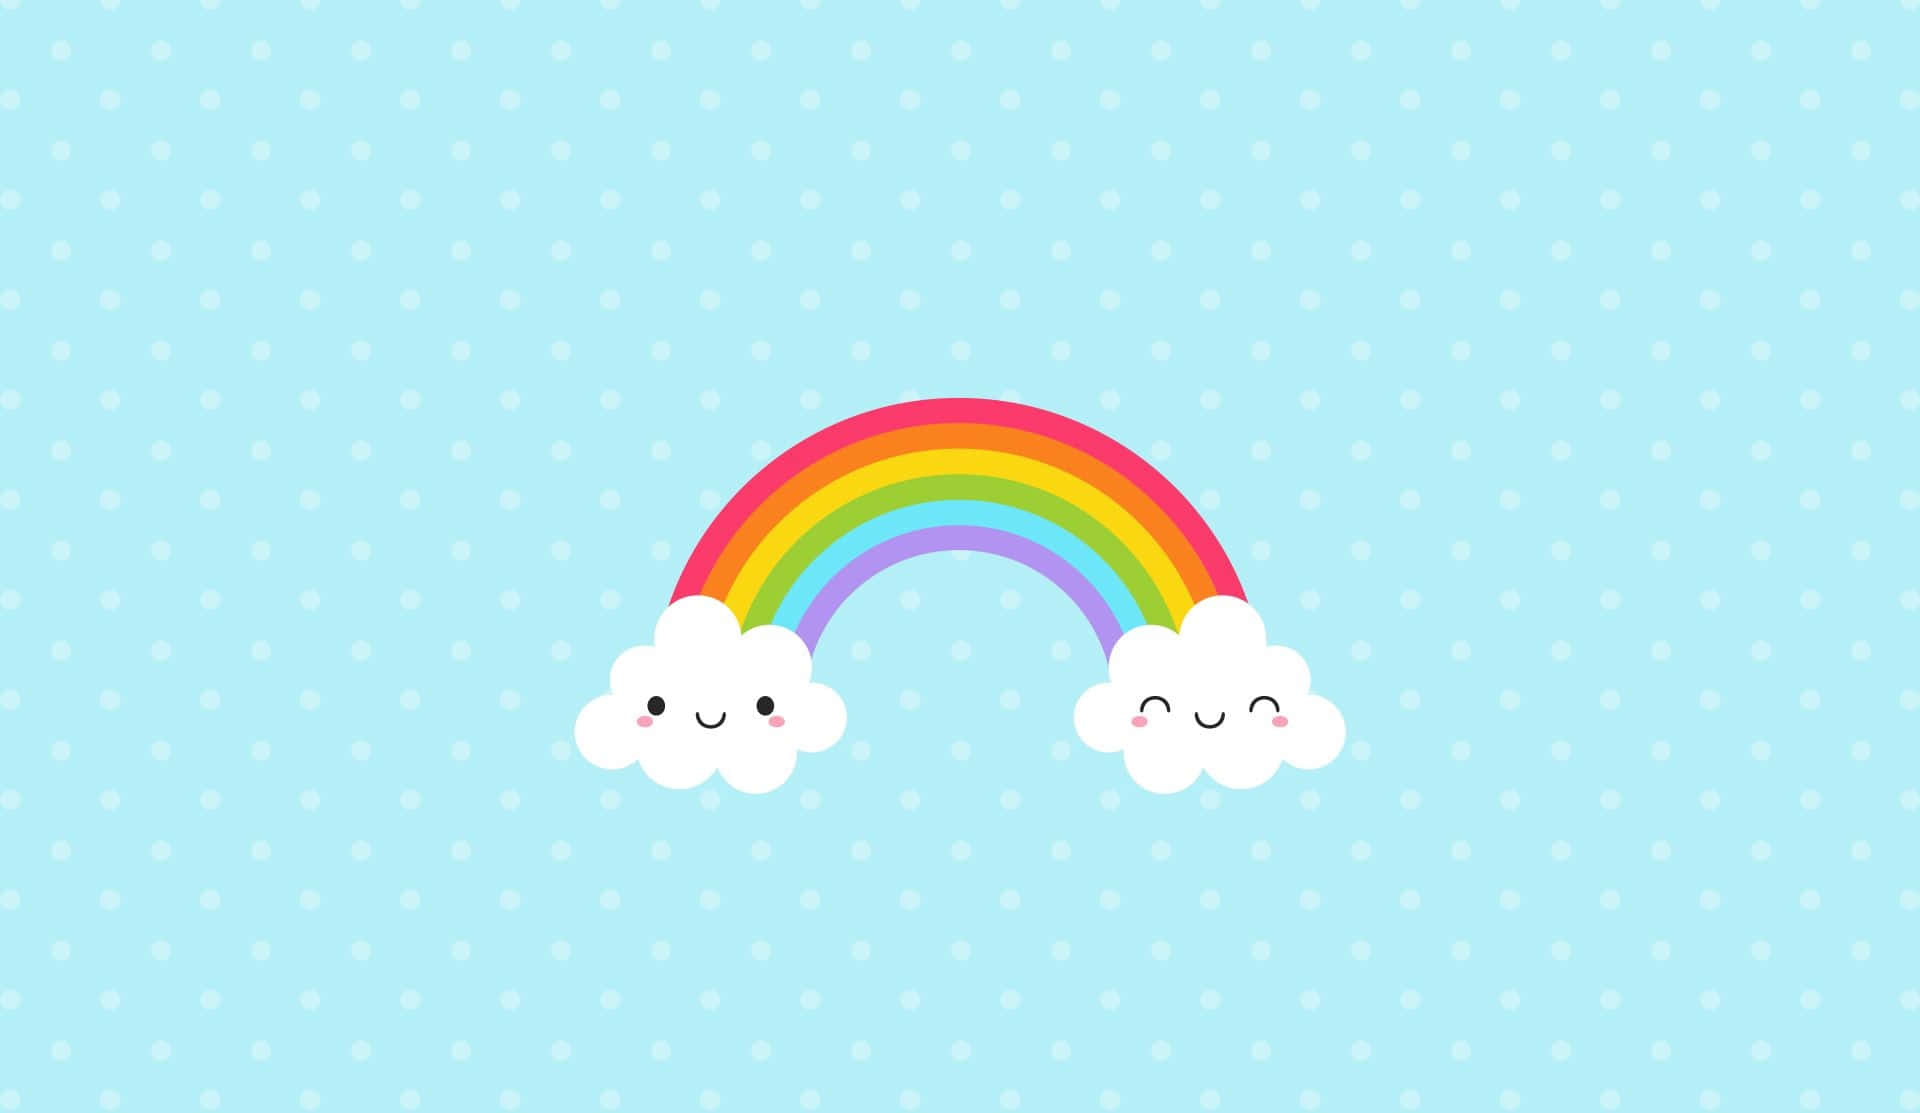 Adorable Kawaii Rainbow with Stars and Clouds Wallpaper